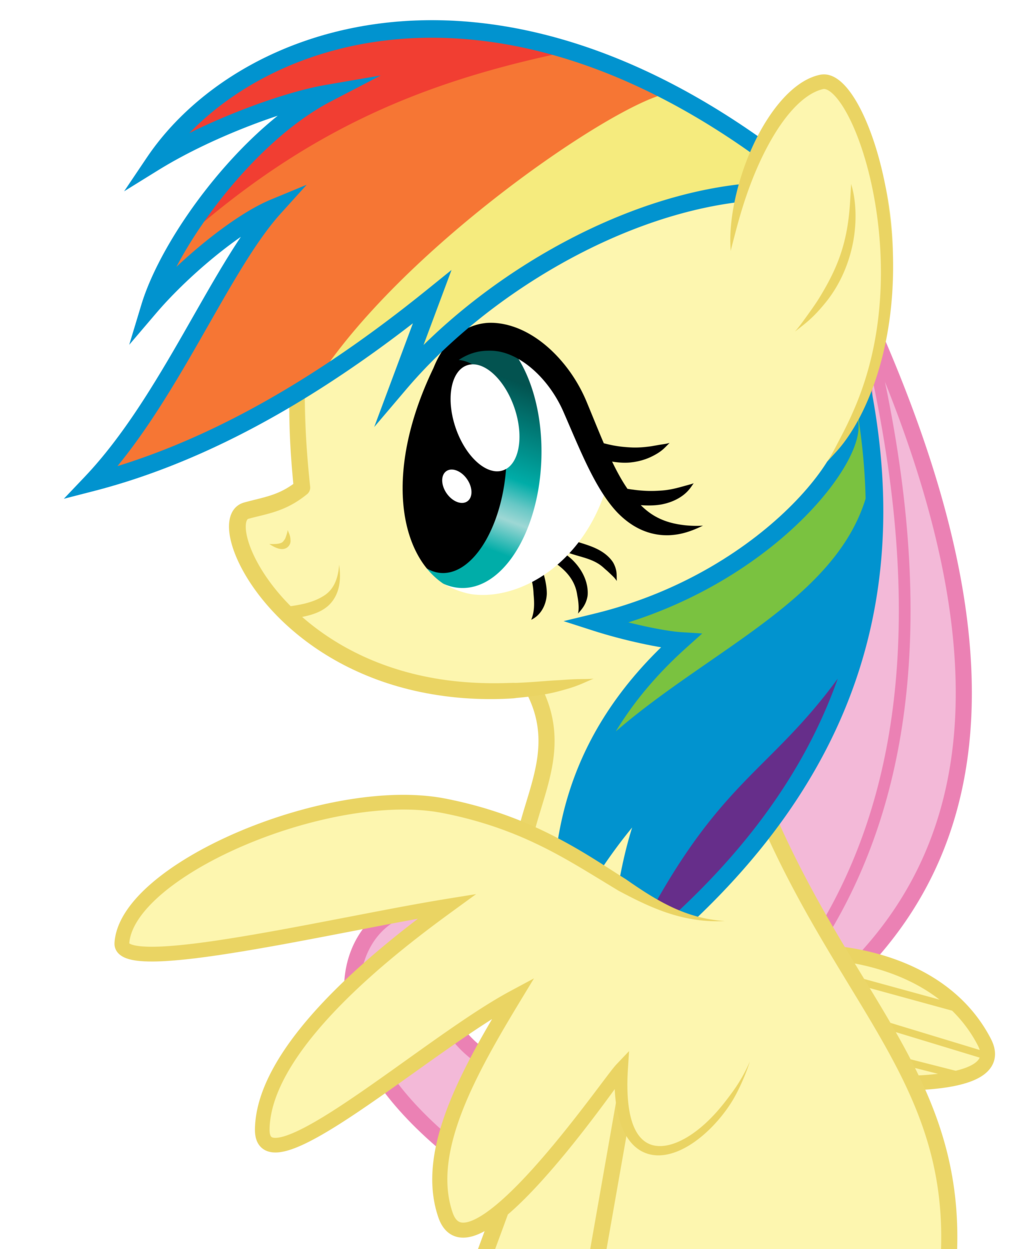 Fluttershy as dash by. Palace clipart rainbow